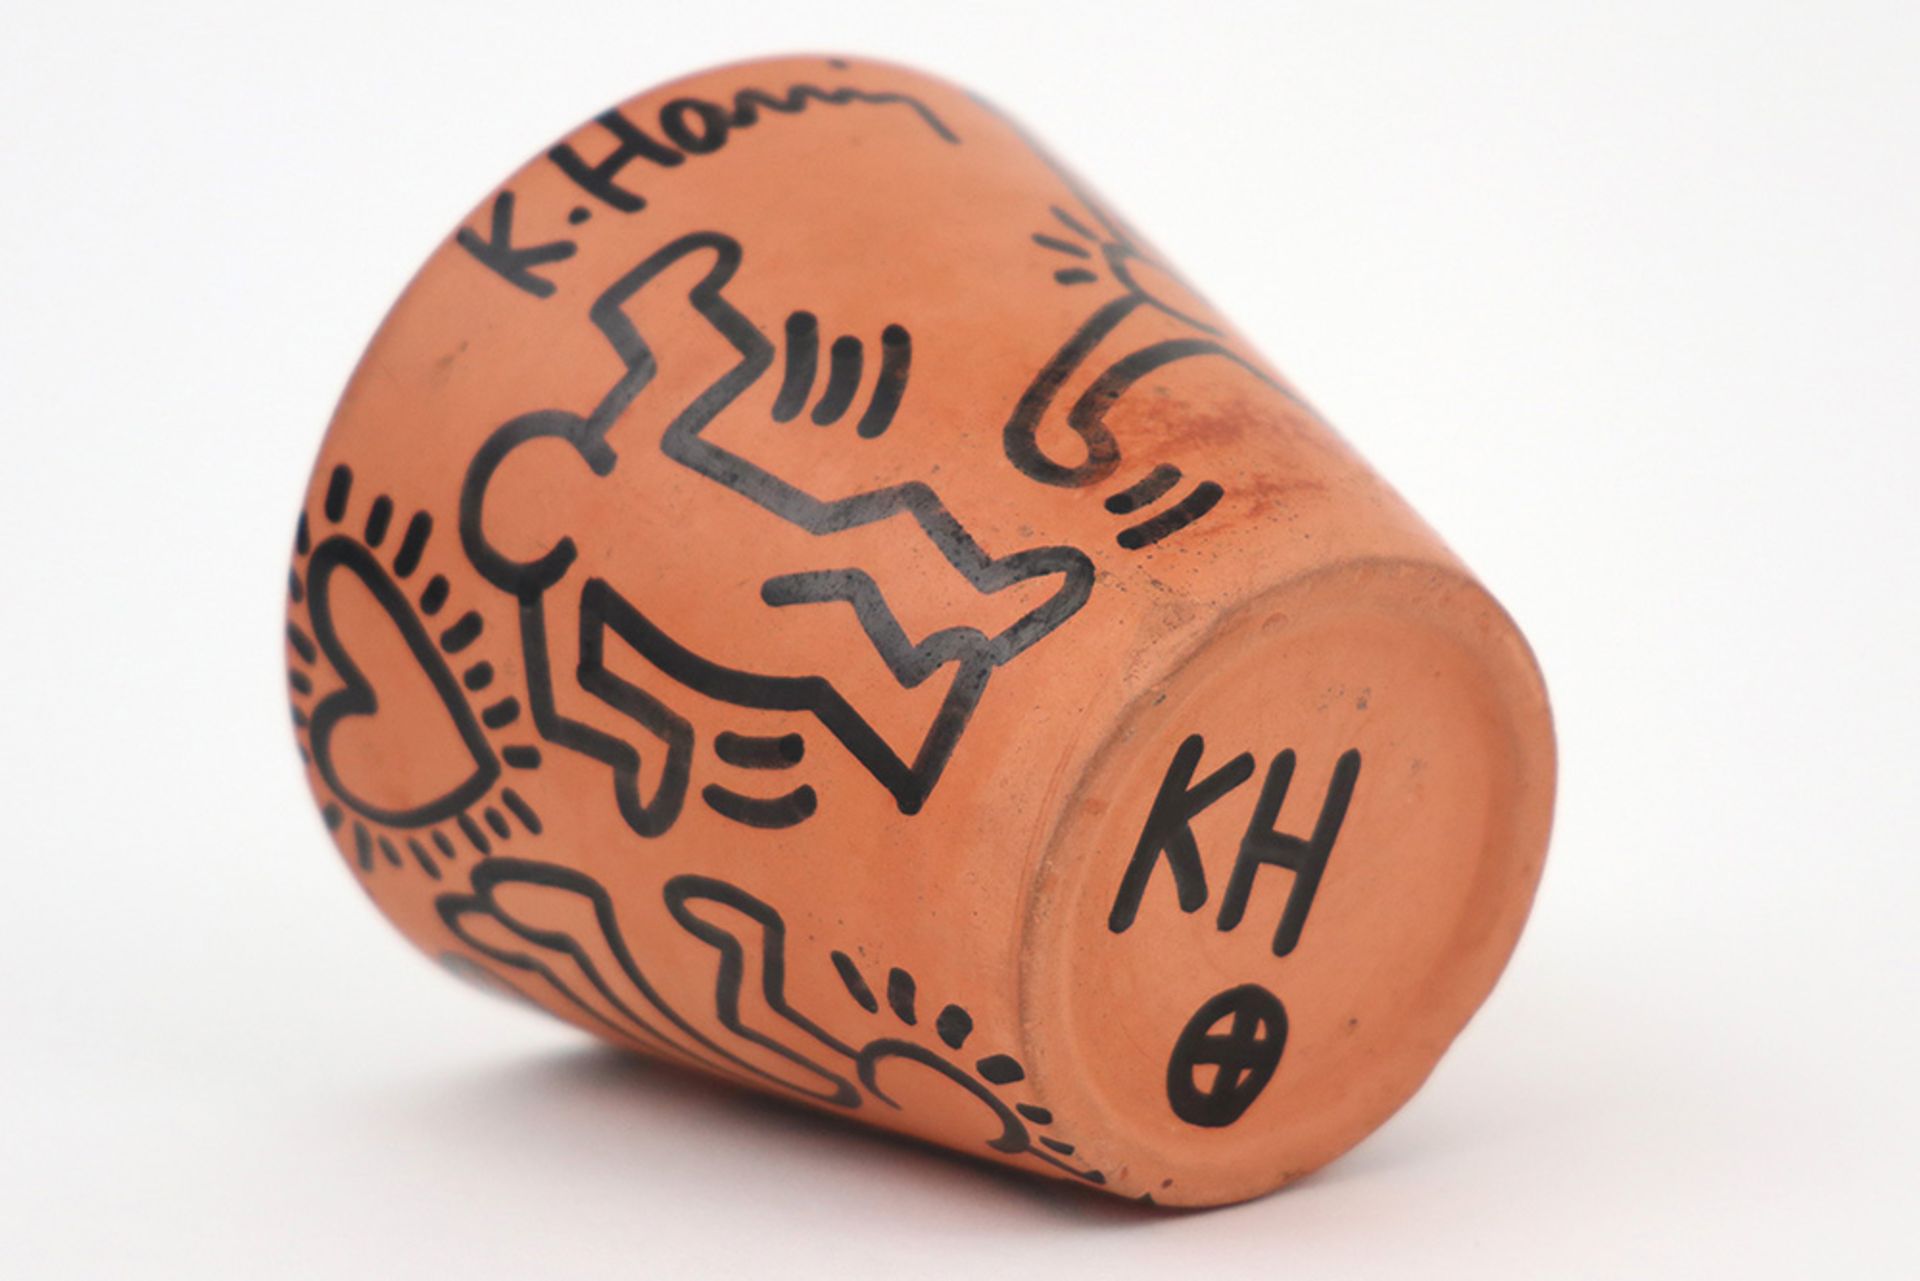 Keith Haring signed drawing in felt-tip pen on ceramic flower pot - dated (19)89 || HARING KEITH ( - Image 7 of 7